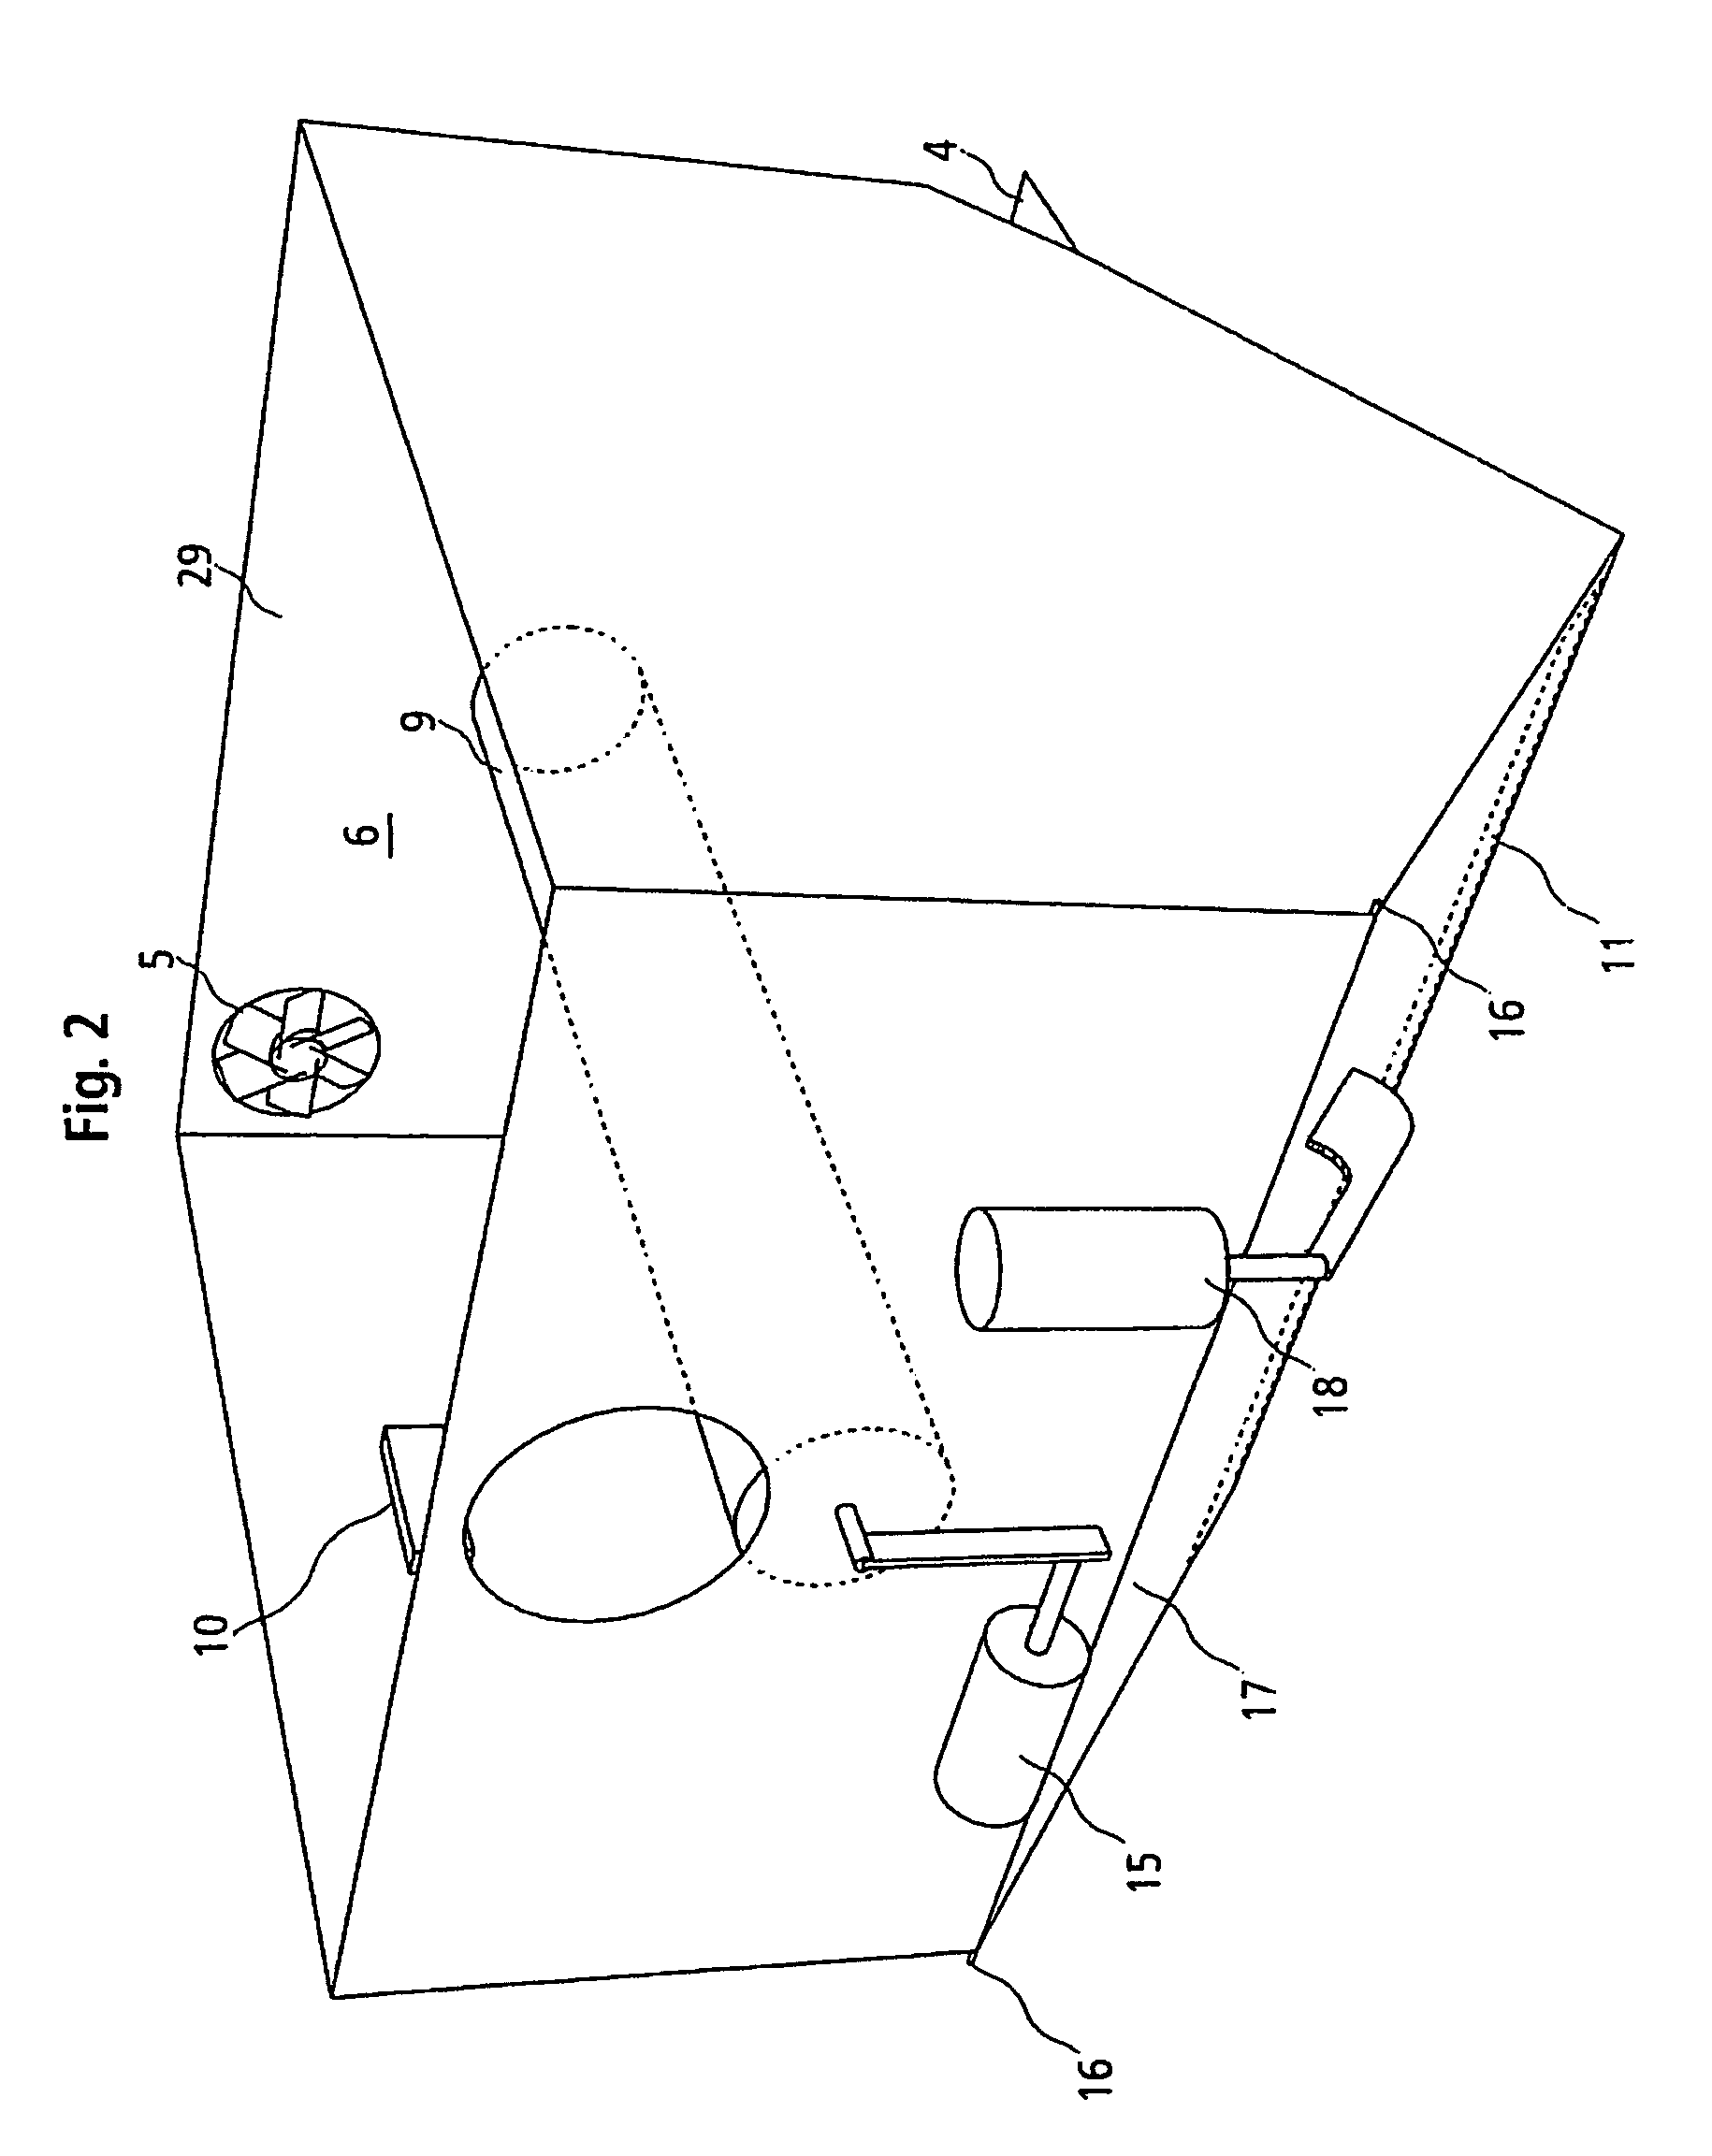 Electronic multiple-use vermin trap and method